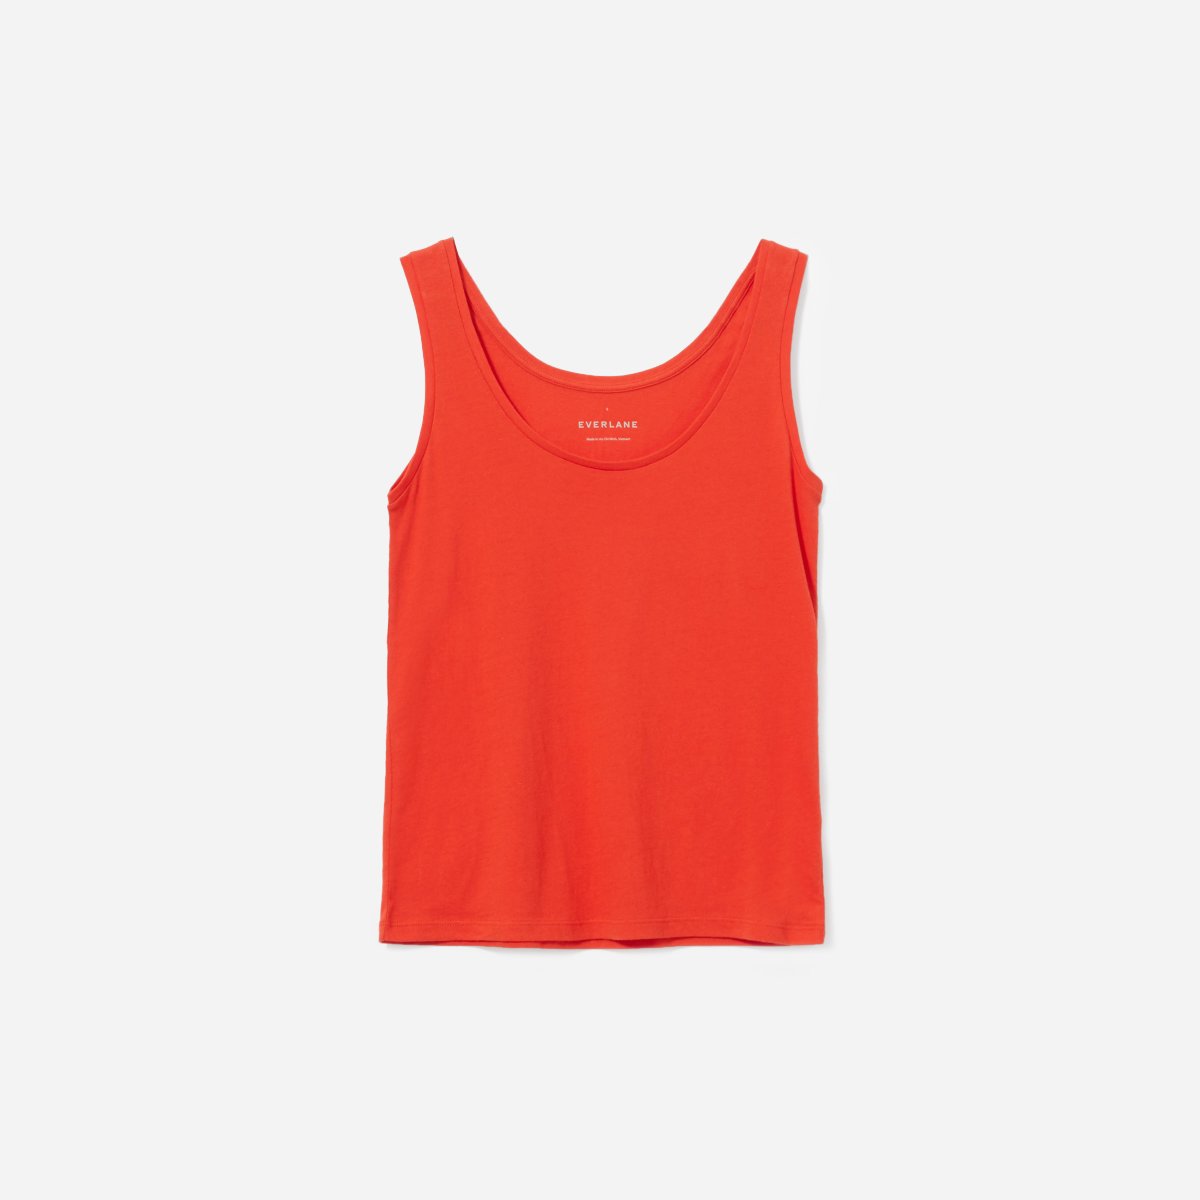 stock photo of everlane relaxed cotton tank in poppy, an orangy color